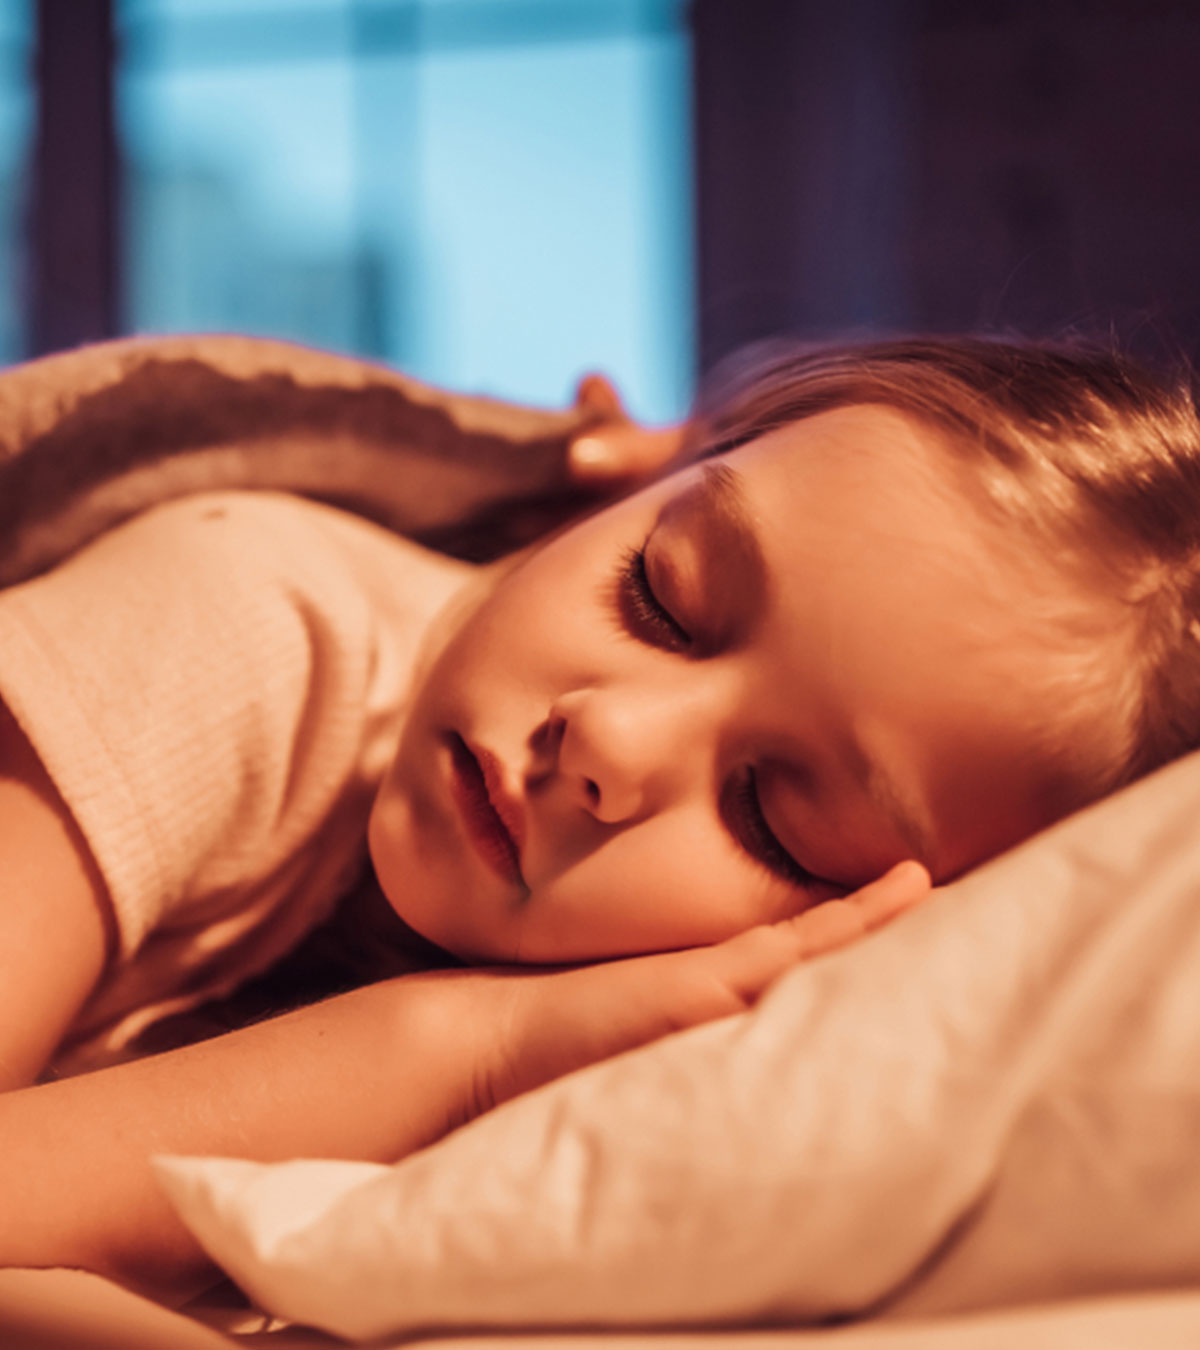 6 Foods To Add To Your Child’s Diet To Help Them Sleep Better